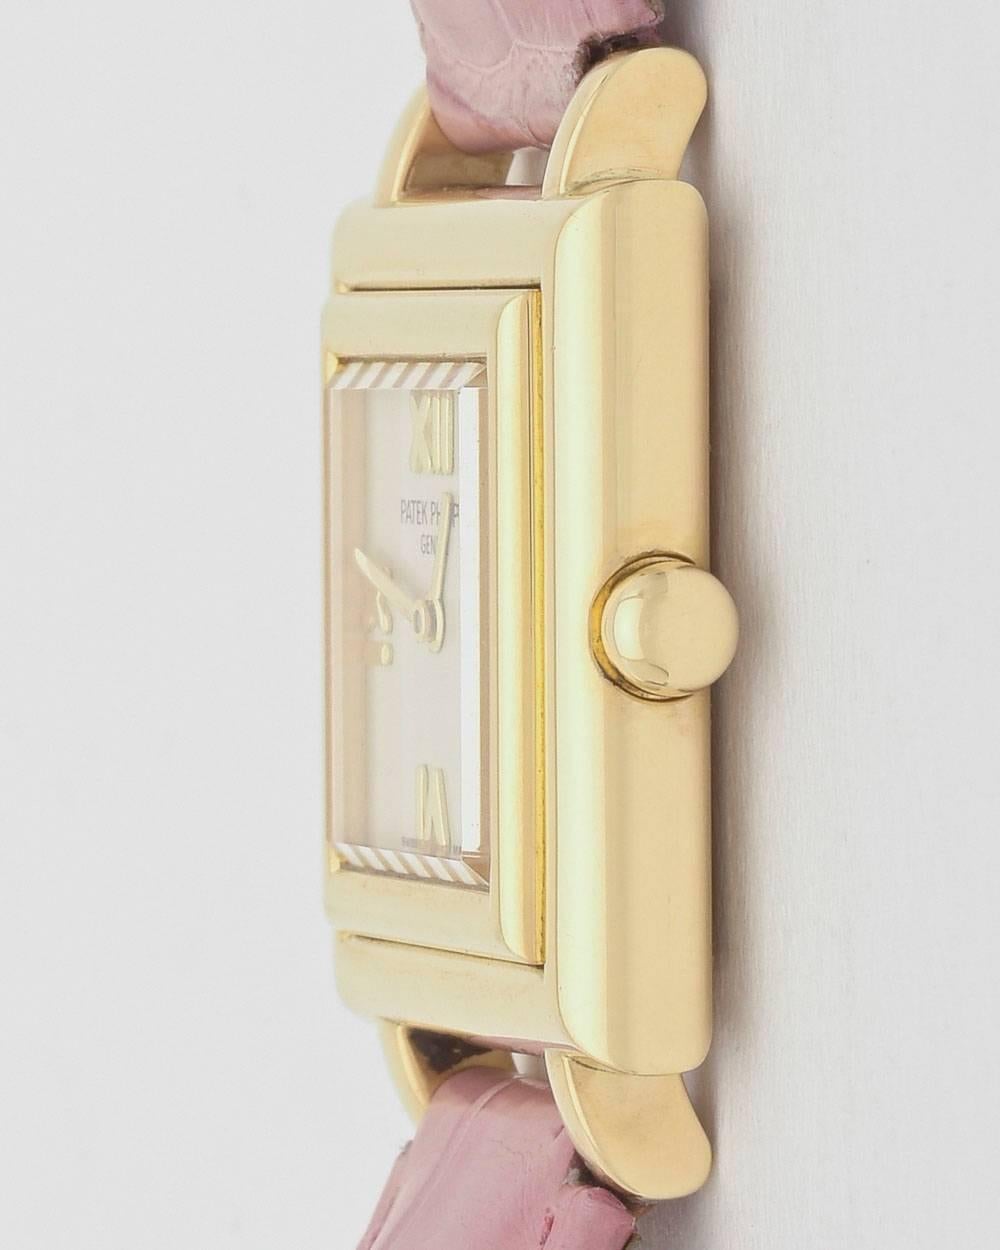 Patek Philippe Ladies' Gondolo wristwatch (ref. 4866J), featuring a quartz movement; silvered dial with applied gold Roman numeral hour markers; and 25mm, square-shaped 18k yellow gold case on a pink alligator strap with an 18k yellow gold ardillon